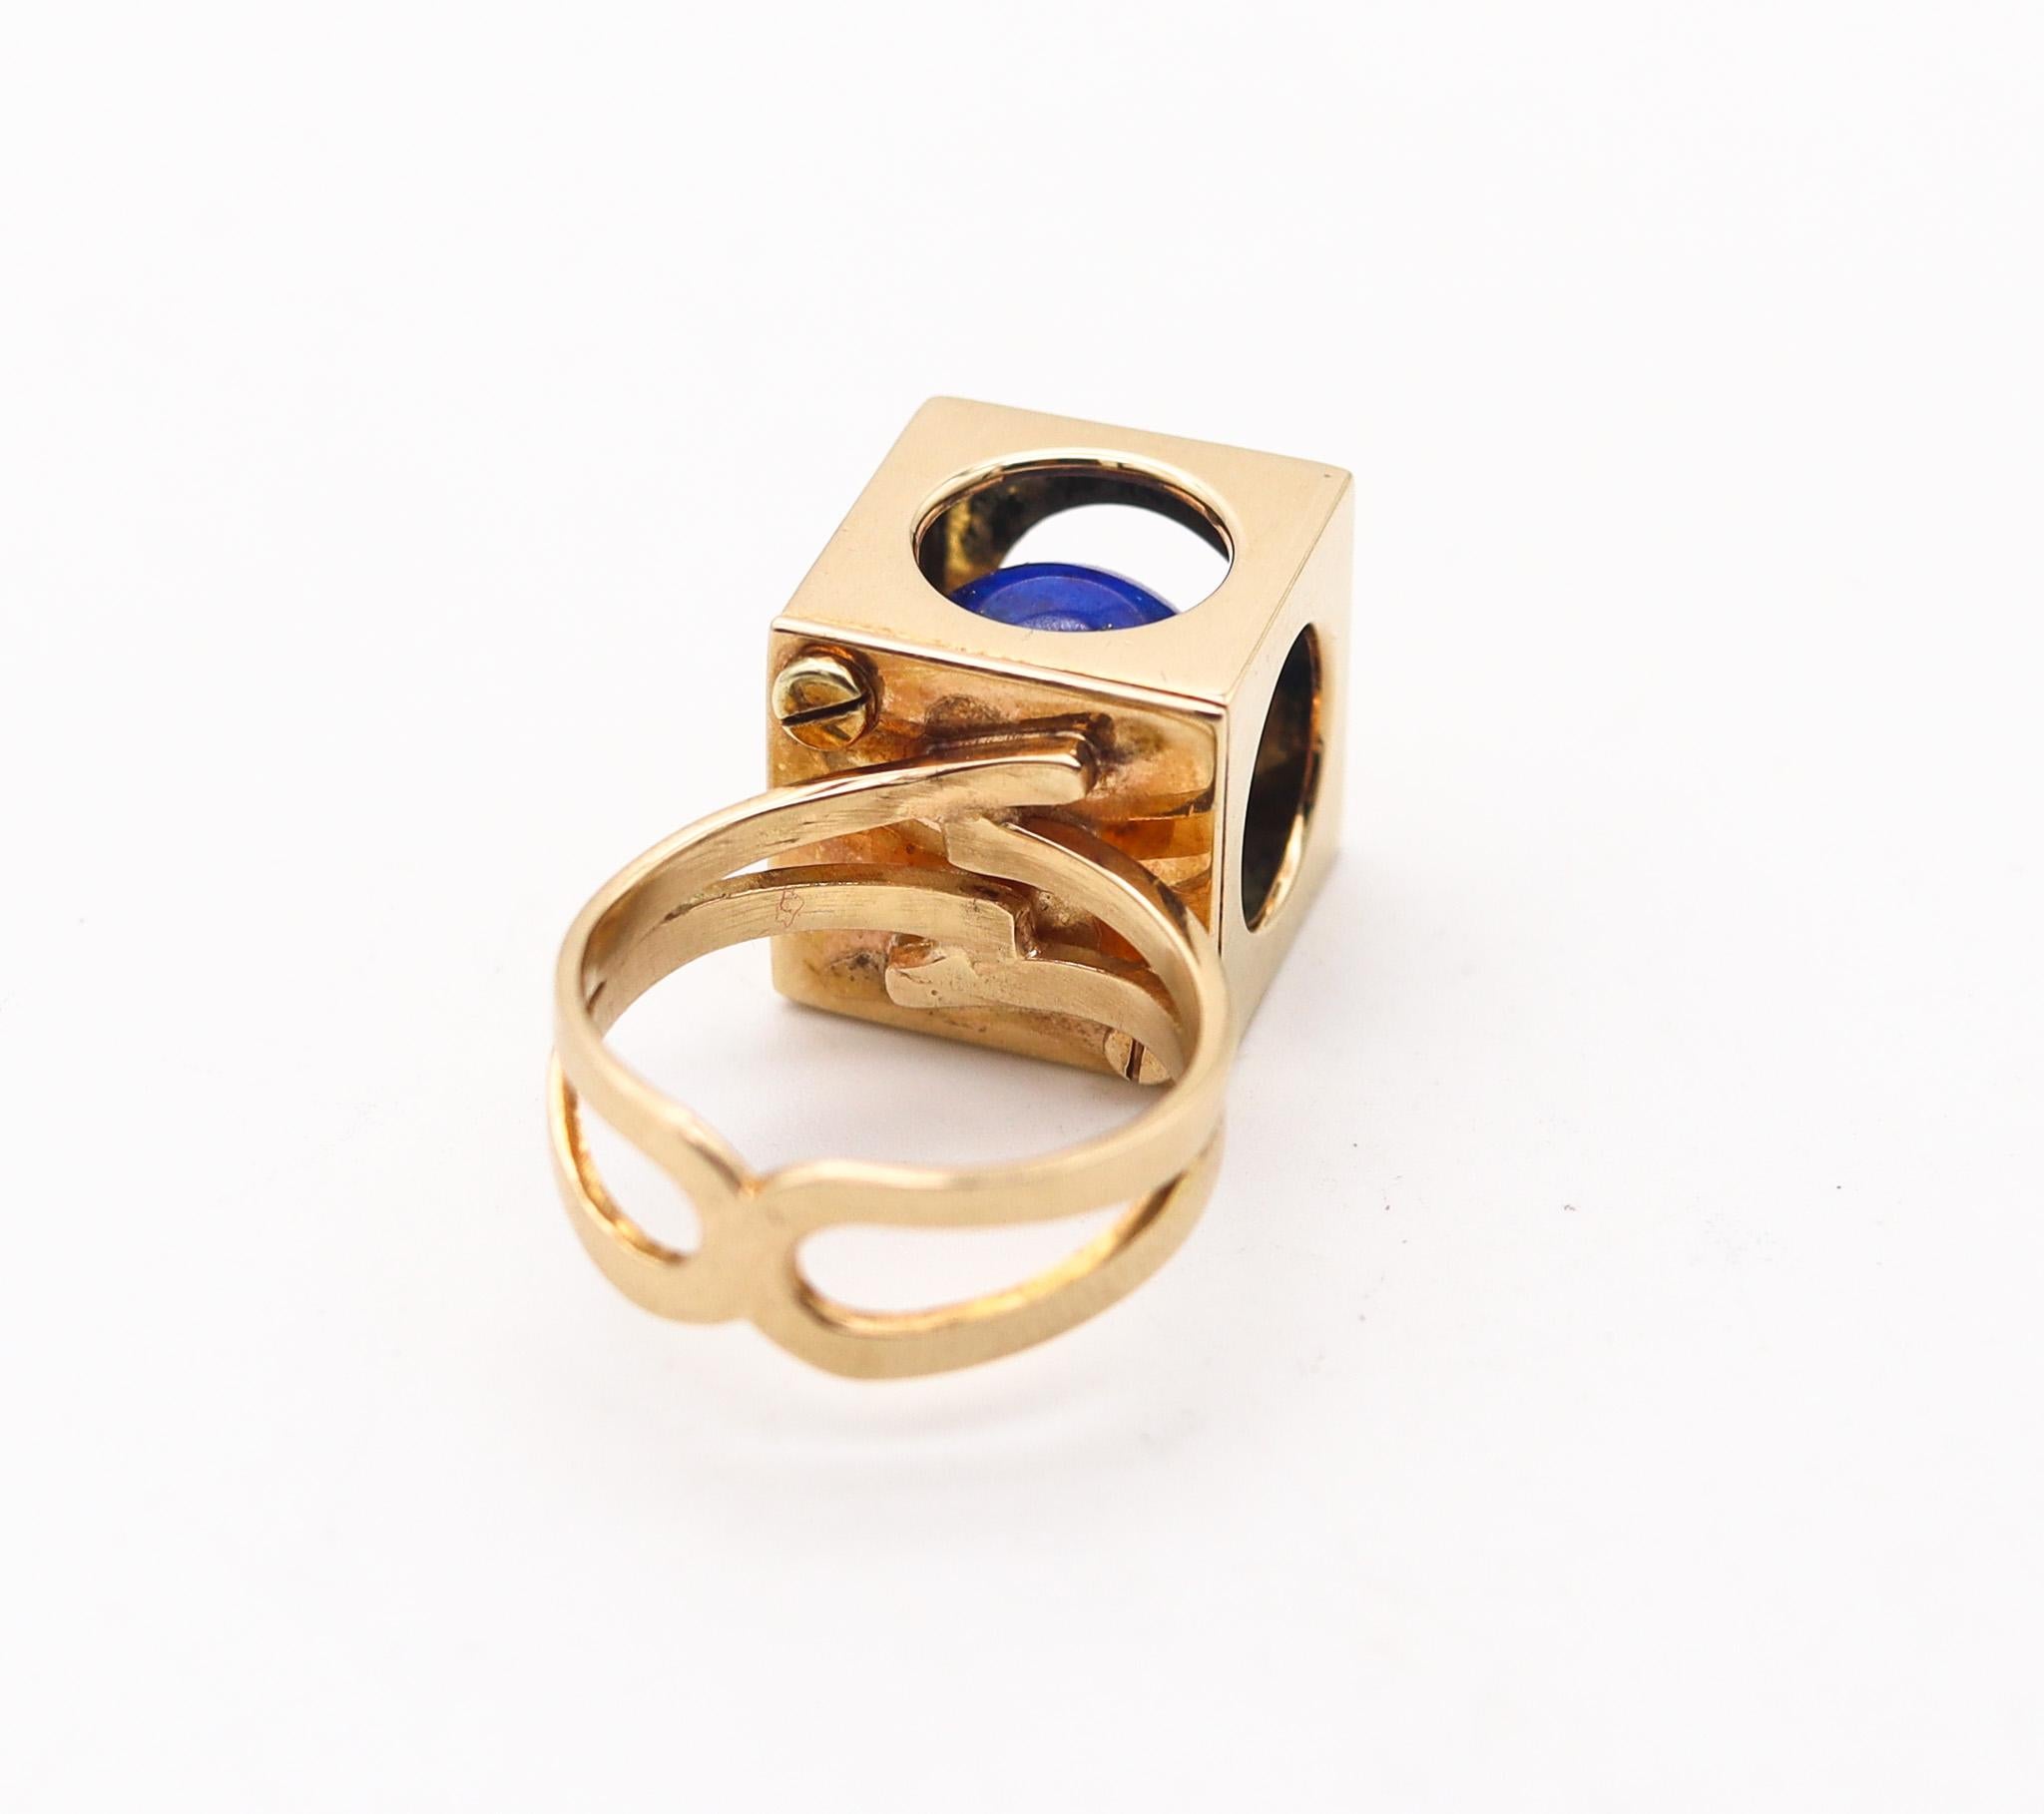 Bead European Modernist 1970 Sculptural Ring In 14Kt Yellow Gold With Lapis Lazuli For Sale